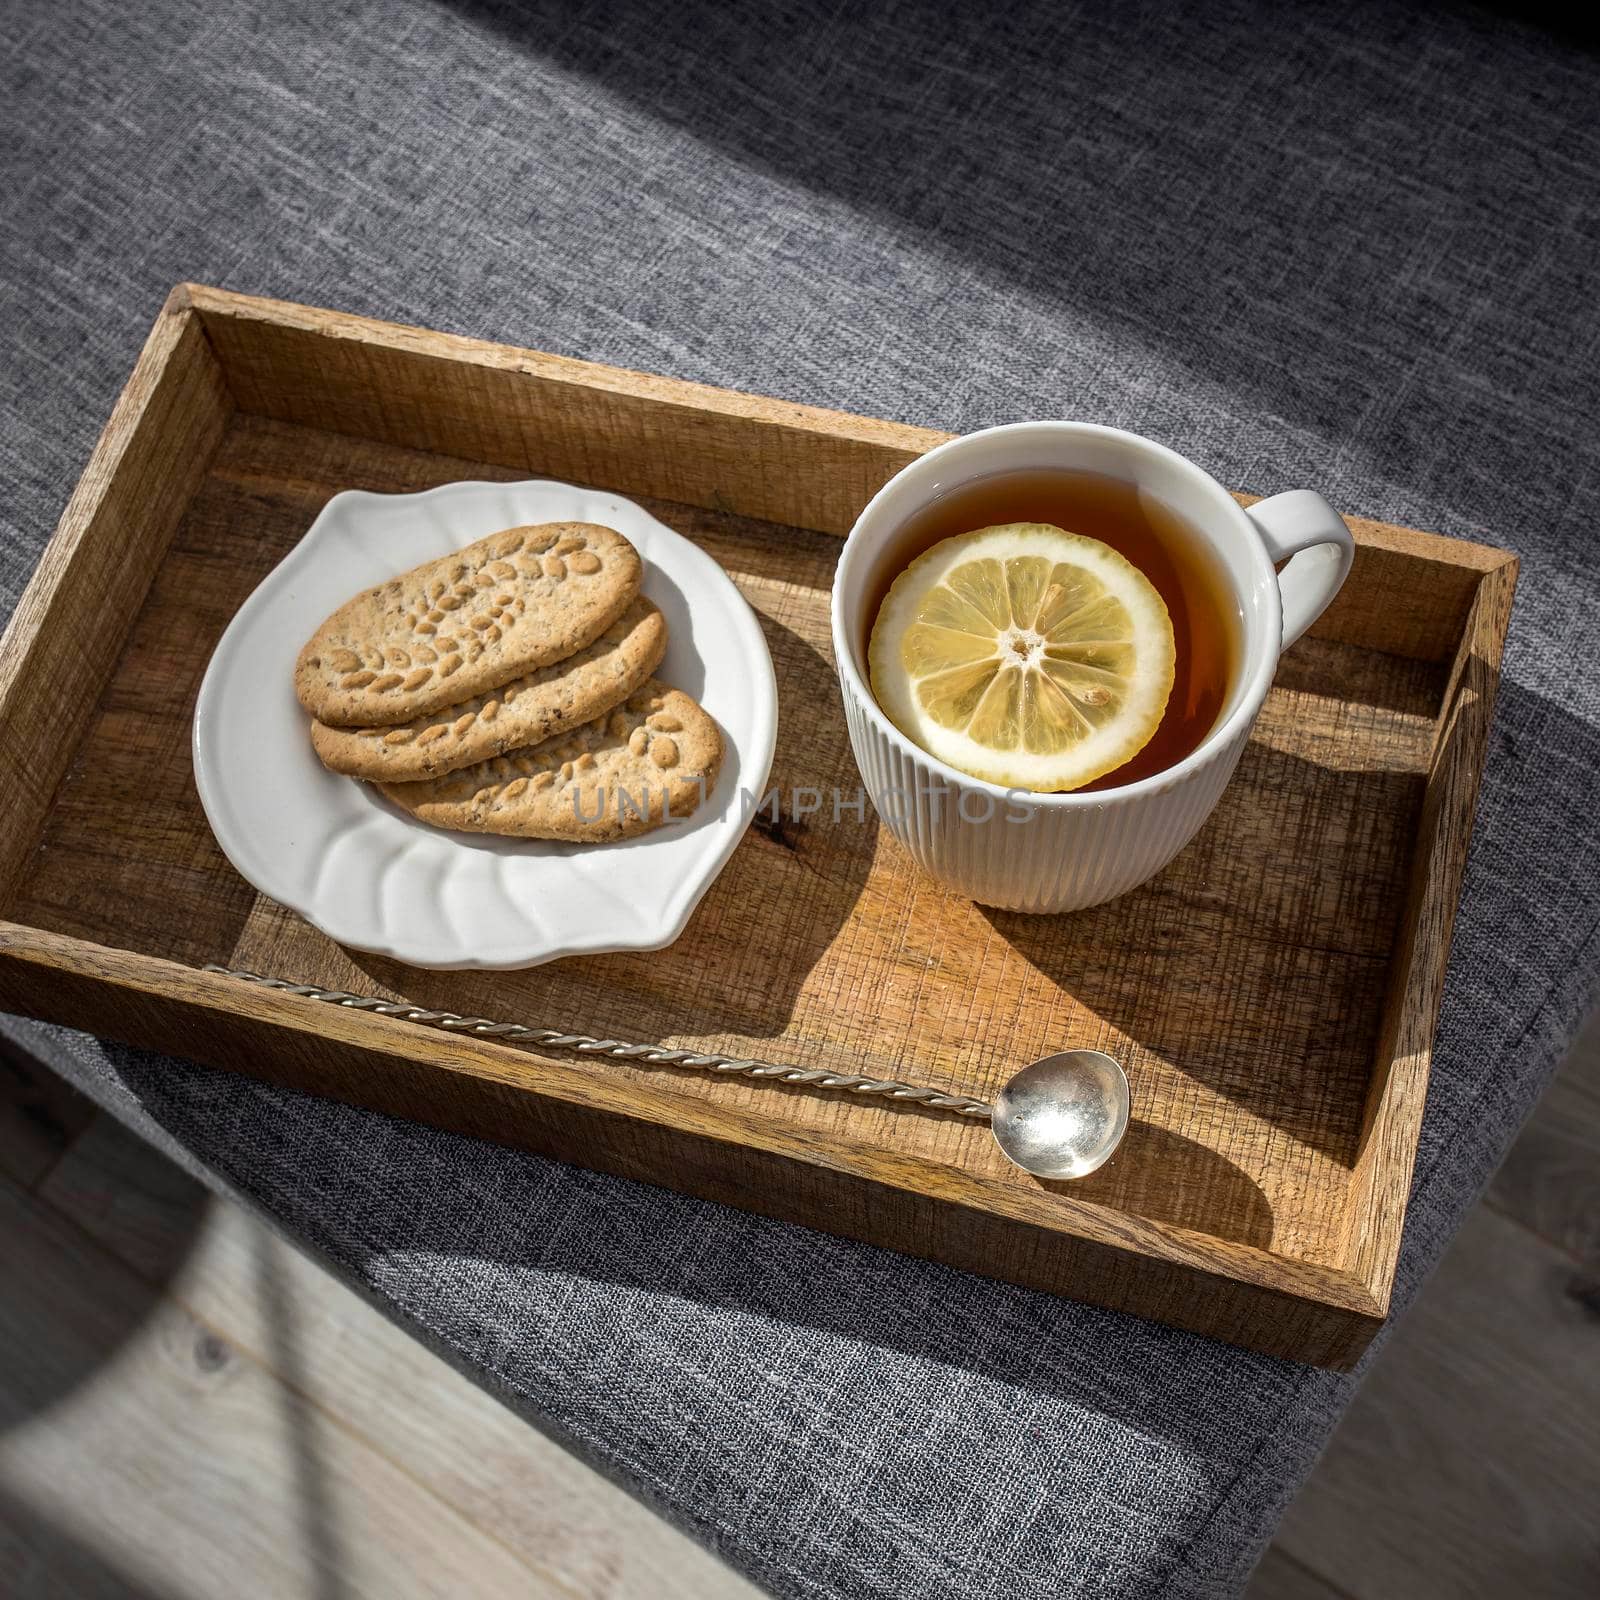 A white cup of tea with lemon, a long cupronickel spoon with a twisted handle and a saucer with three oatmeal cookies for breakfast on a wooden tray, a rag napkin on a gray sofa. by elenarostunova